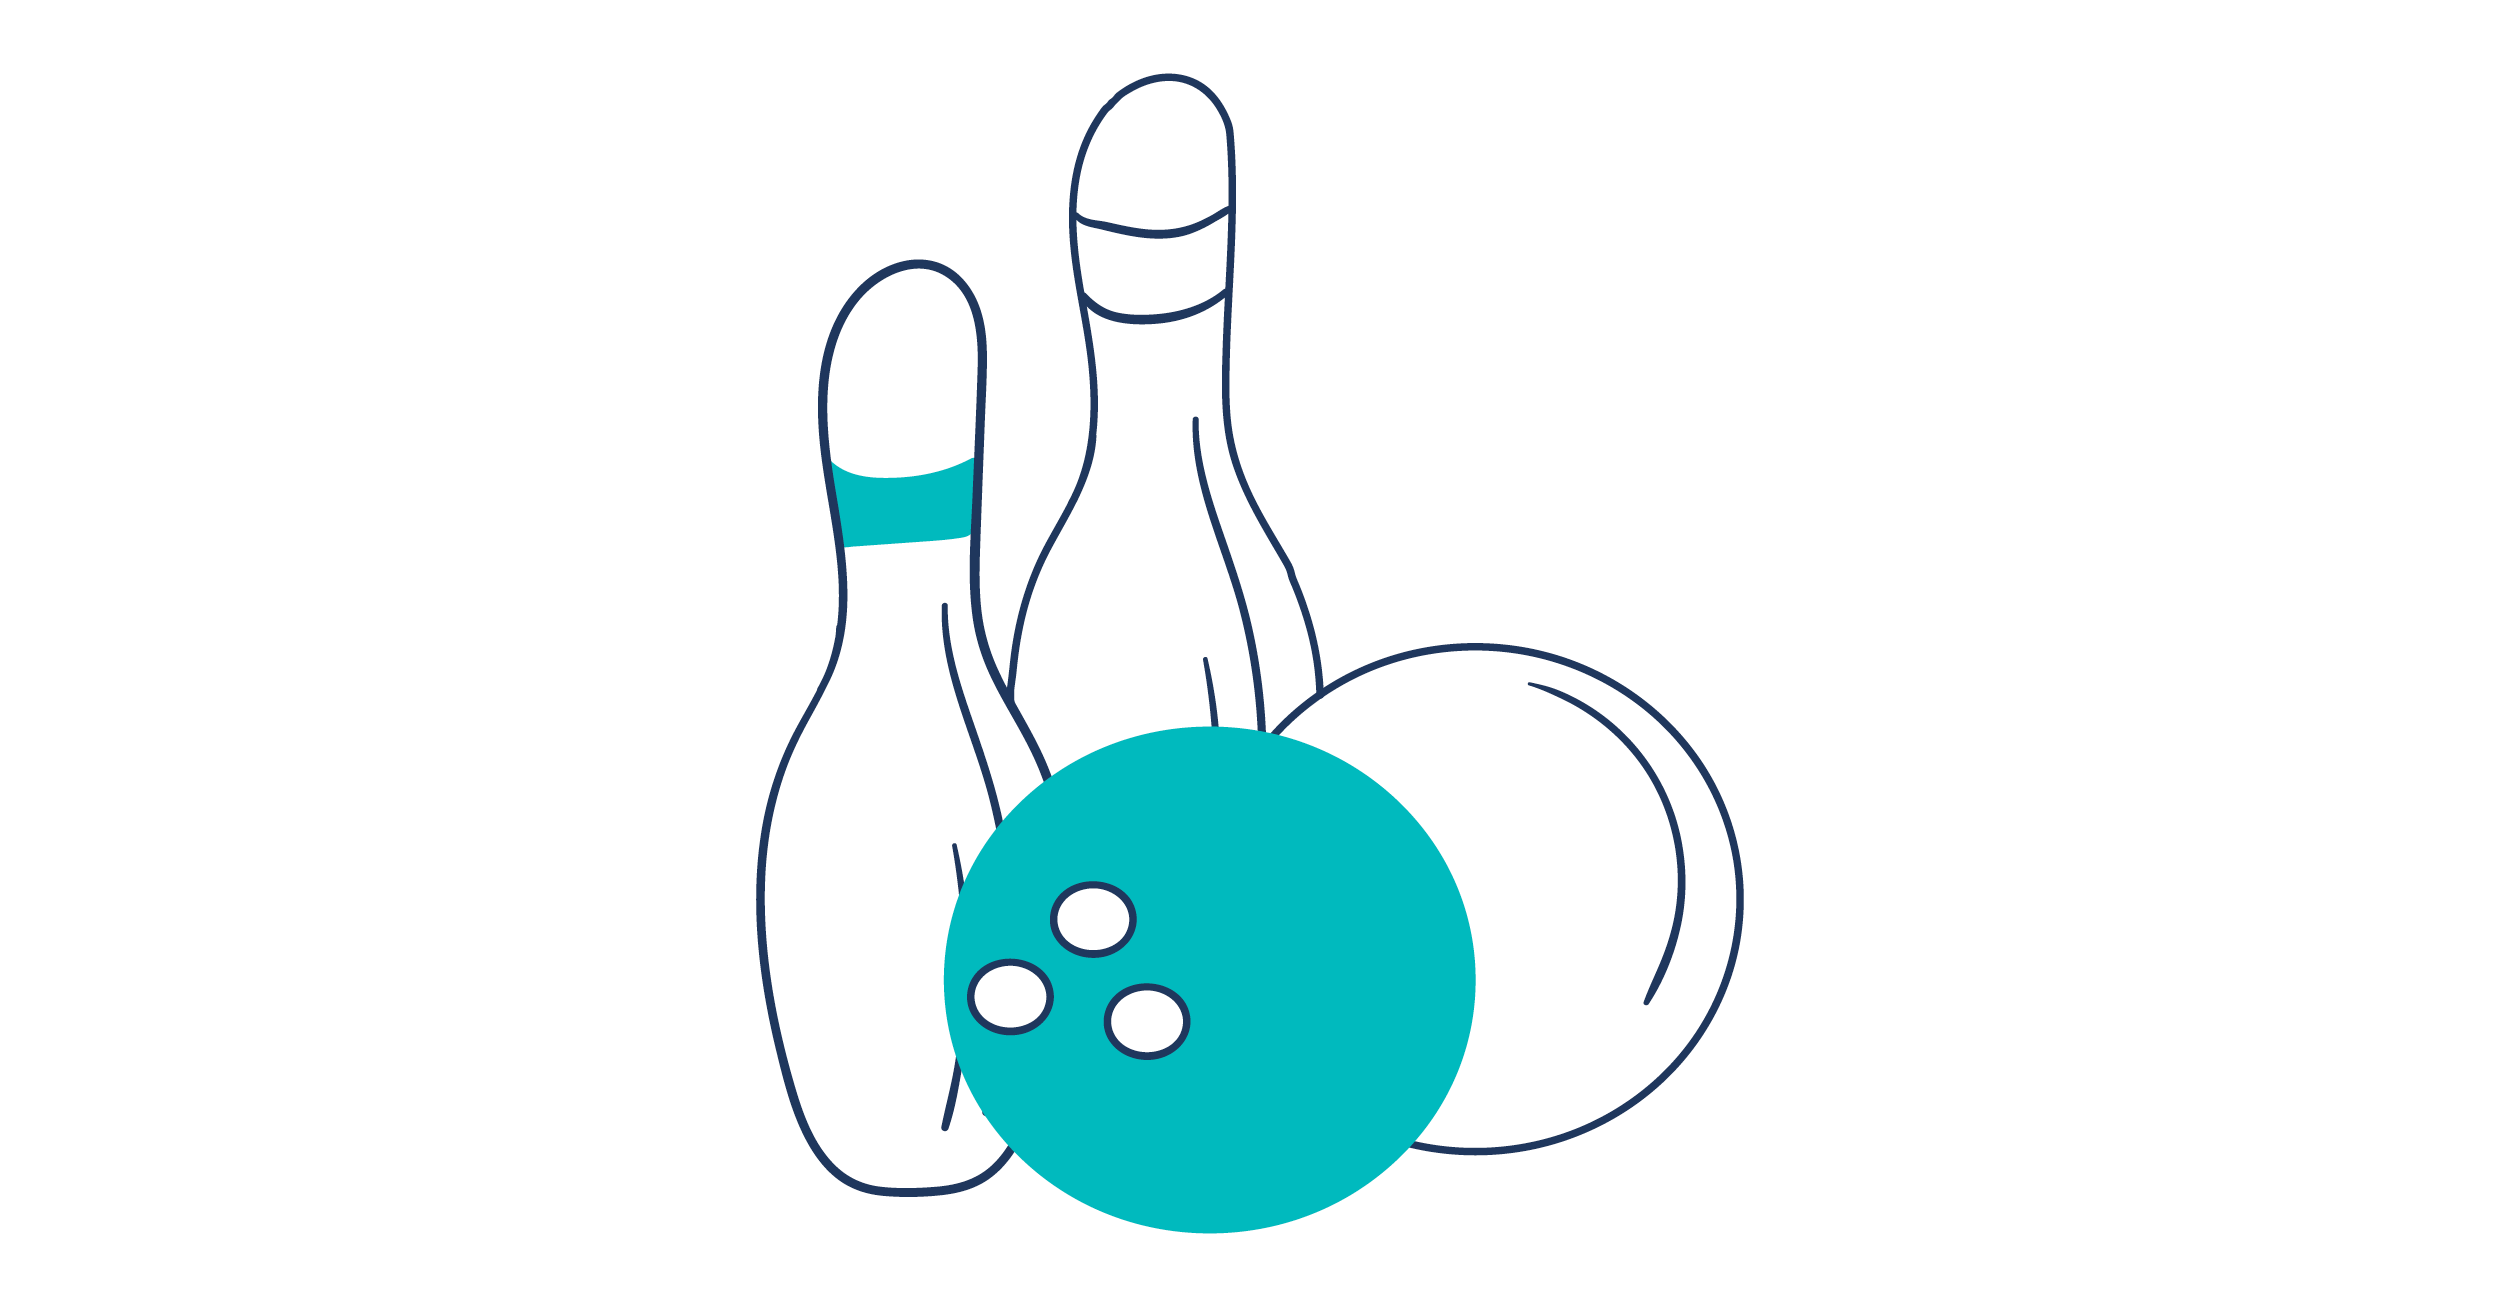 The image shows an illustration of two bowling pins and two bowling balls.